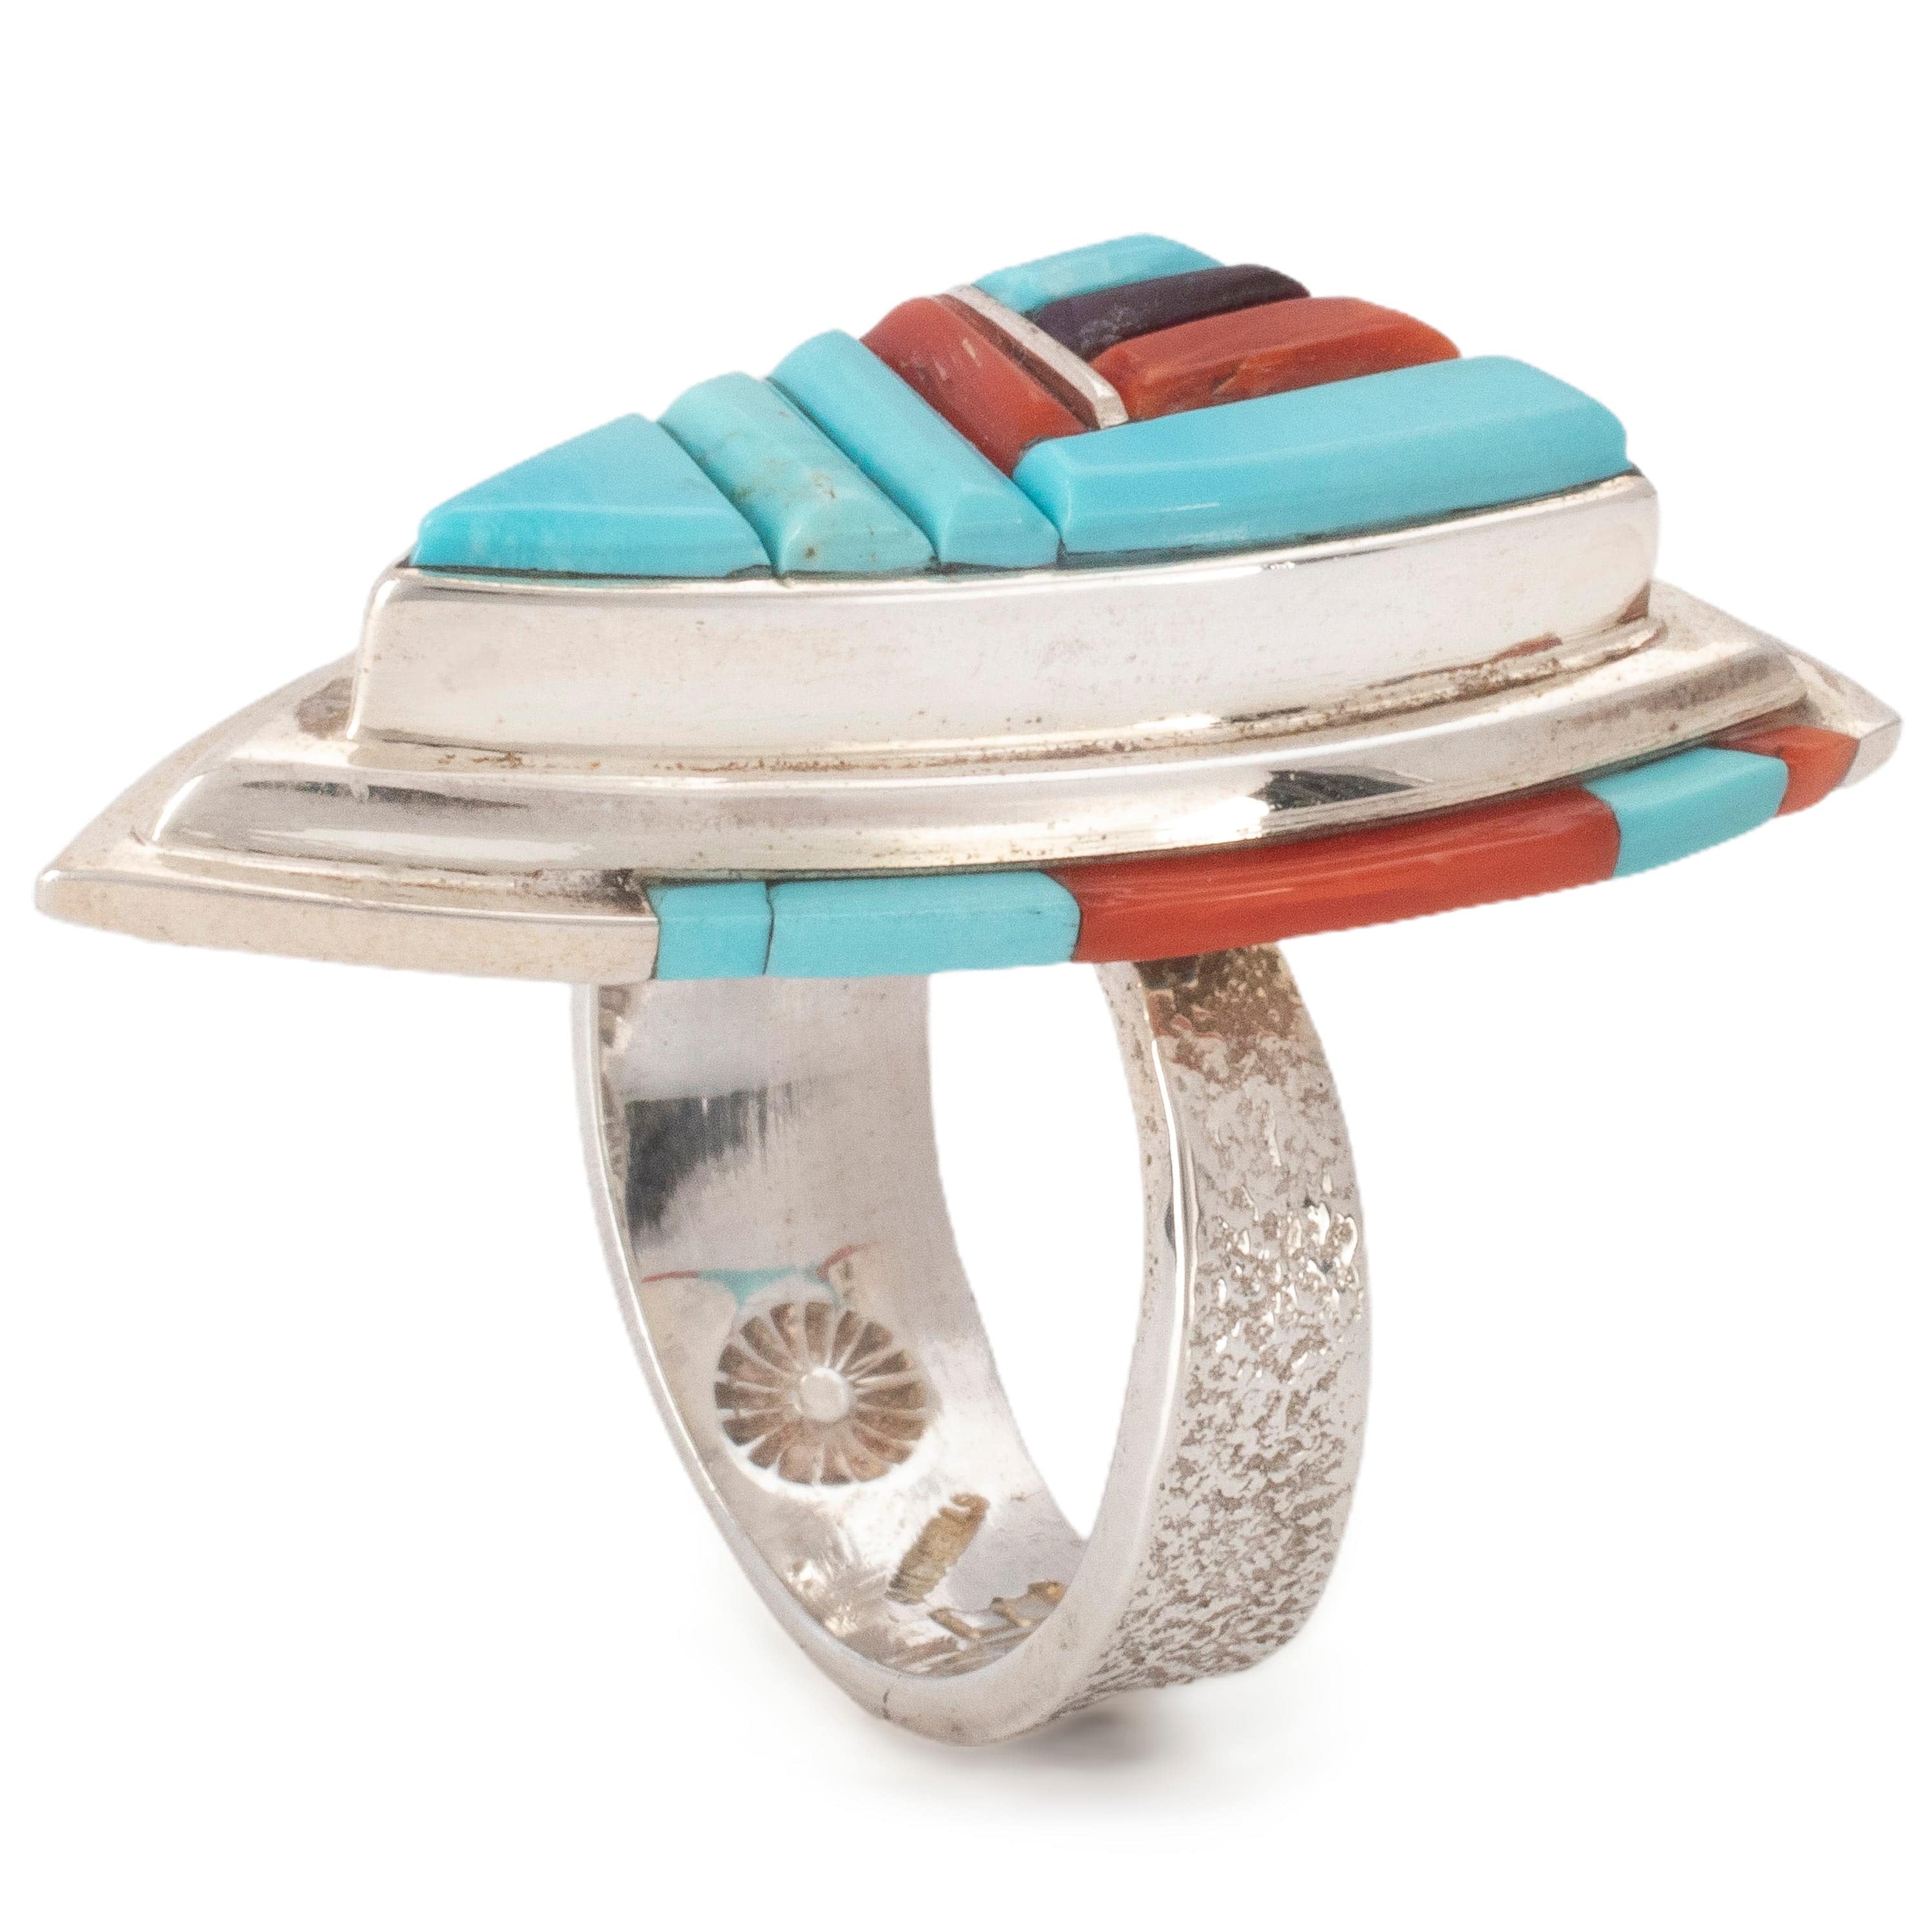 Kalifano Native American Jewelry 10 David Tune Navajo Sleeping Beauty Turquoise, Coral, and Sugilite USA Native American Made 925 Sterling Silver Ring NAR1600.010.10